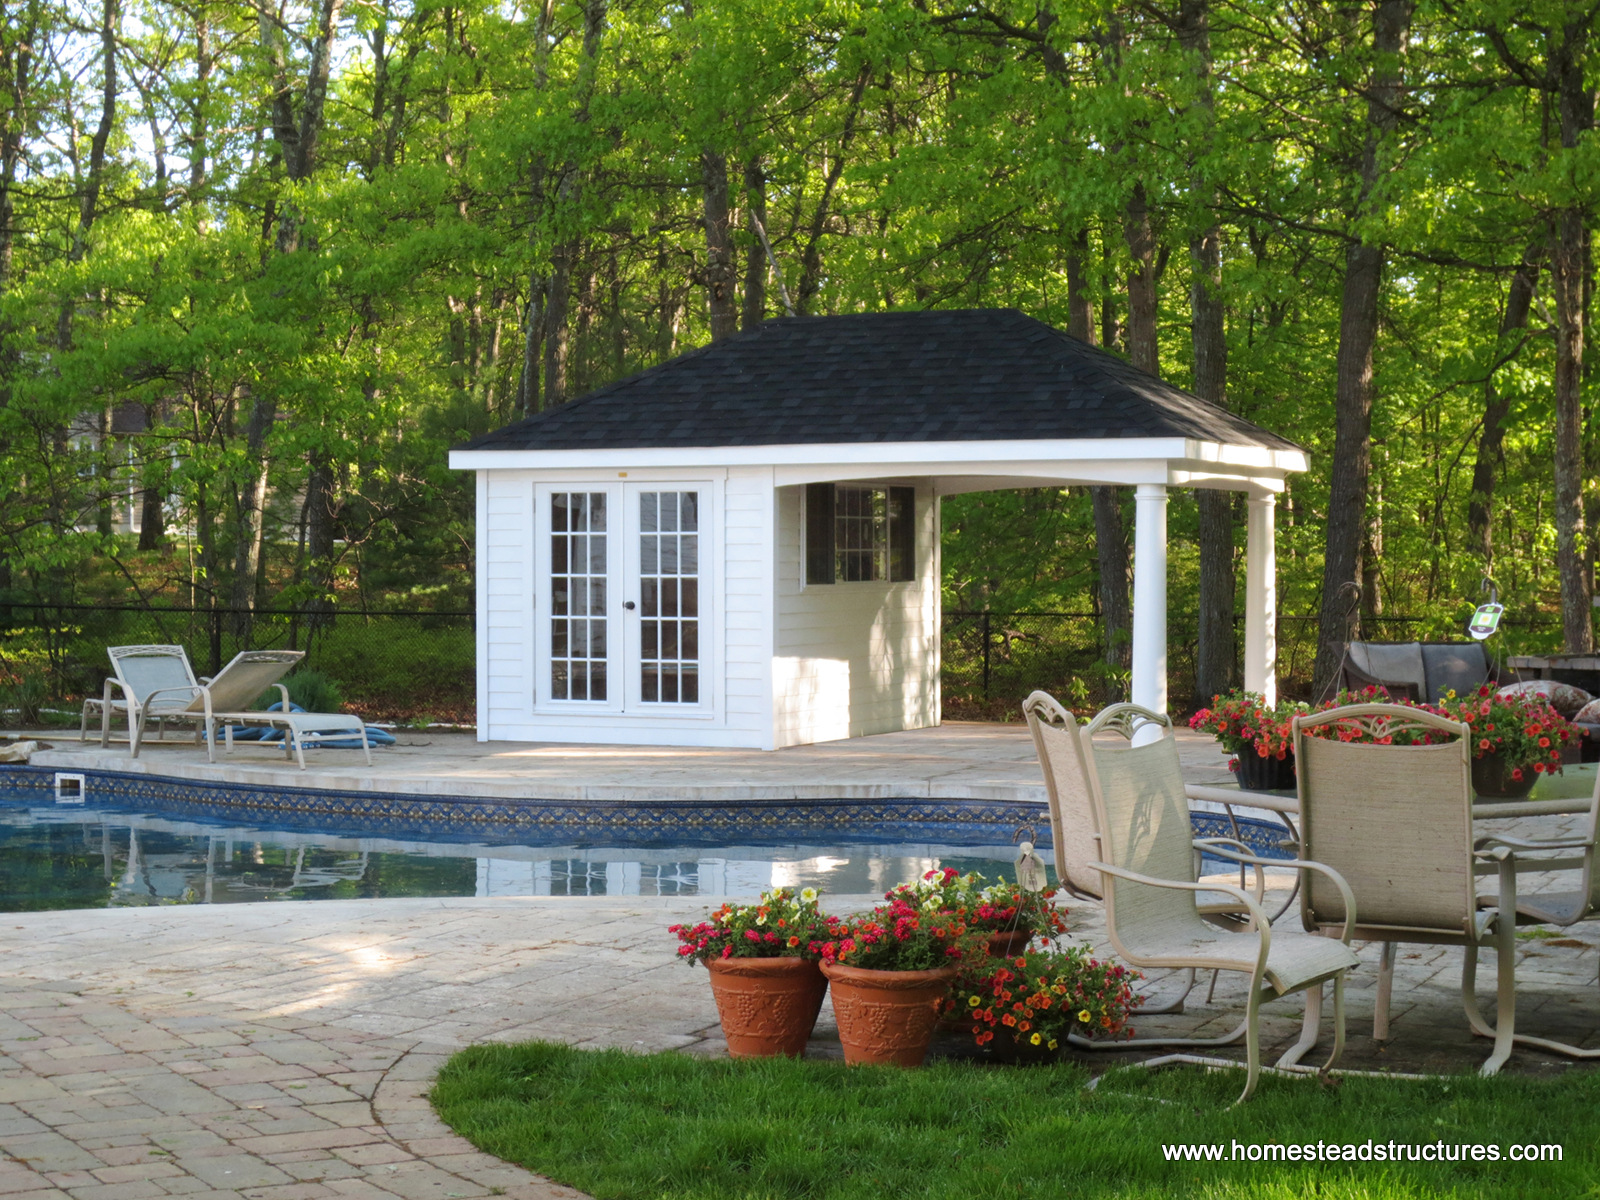 Avalon Pool House | Homestead Structures